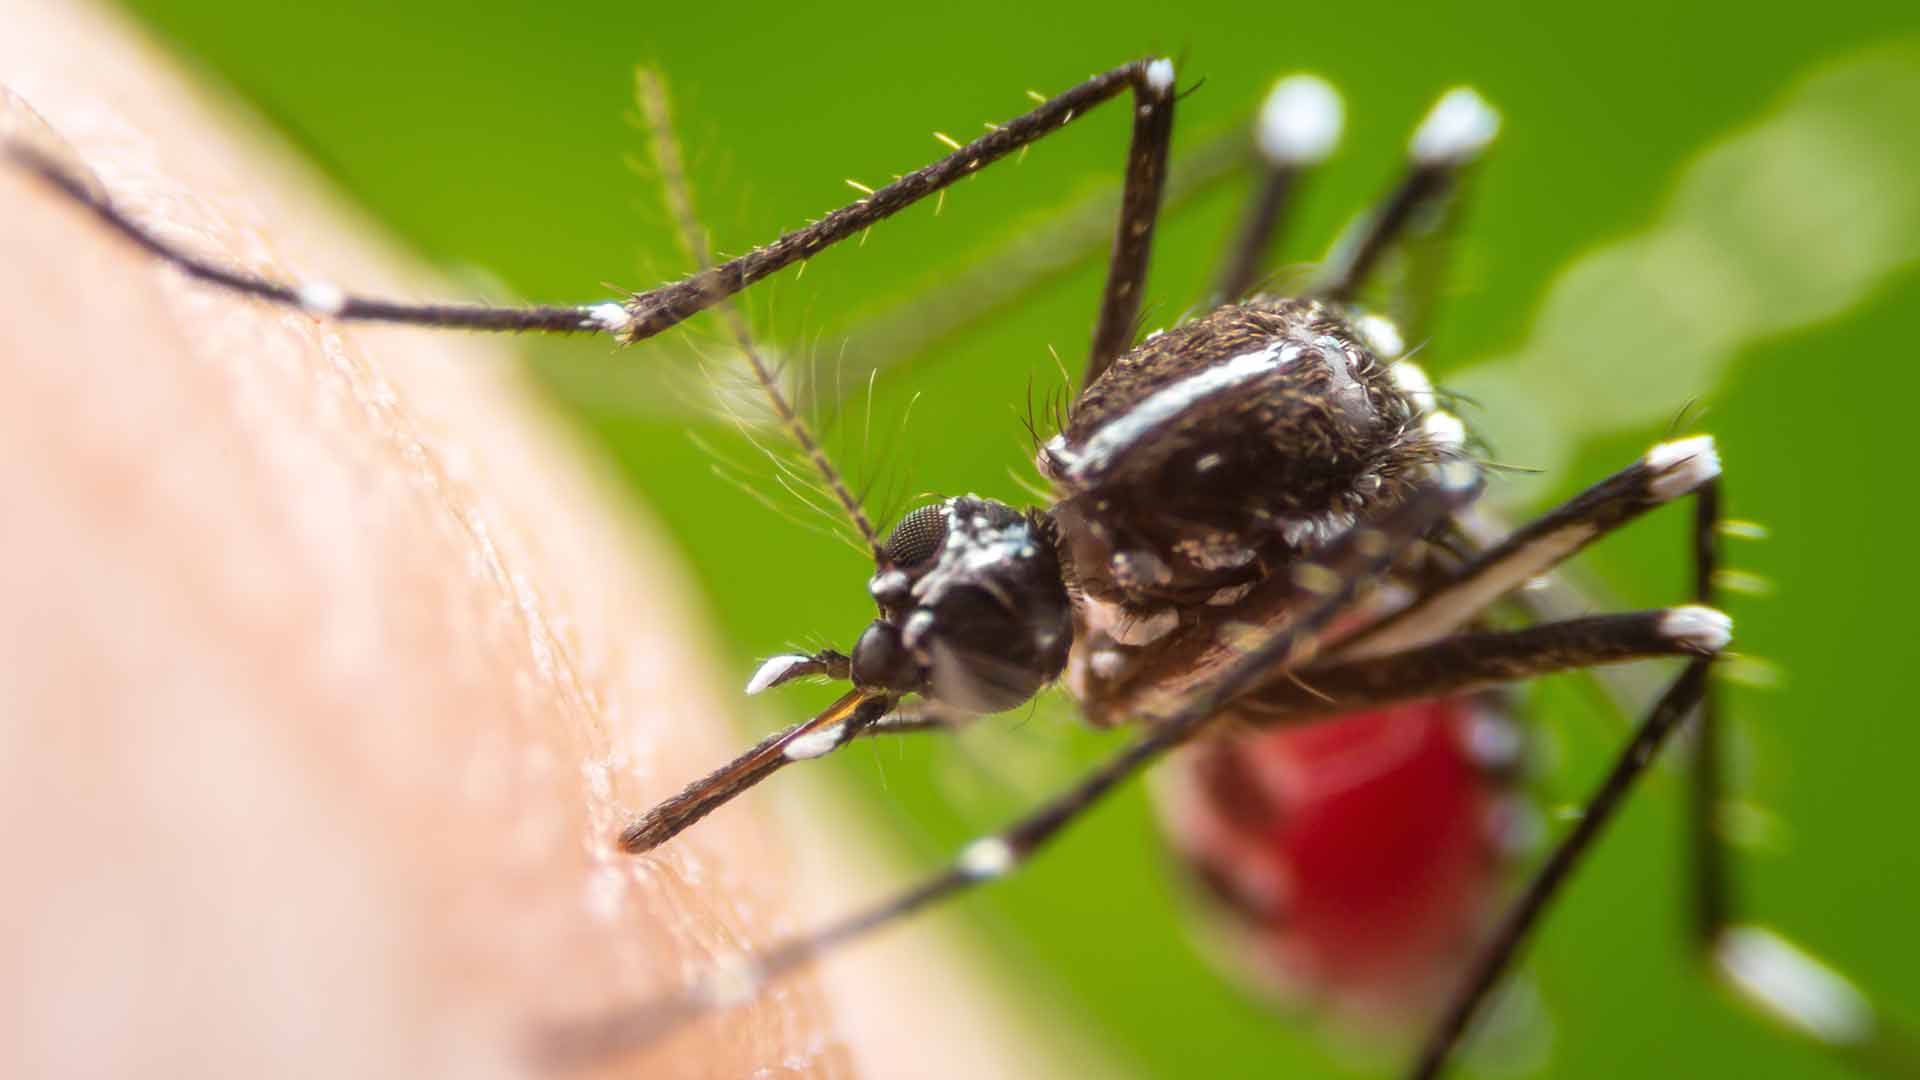 An up close photo of a mosquito seen in Plano, TX.